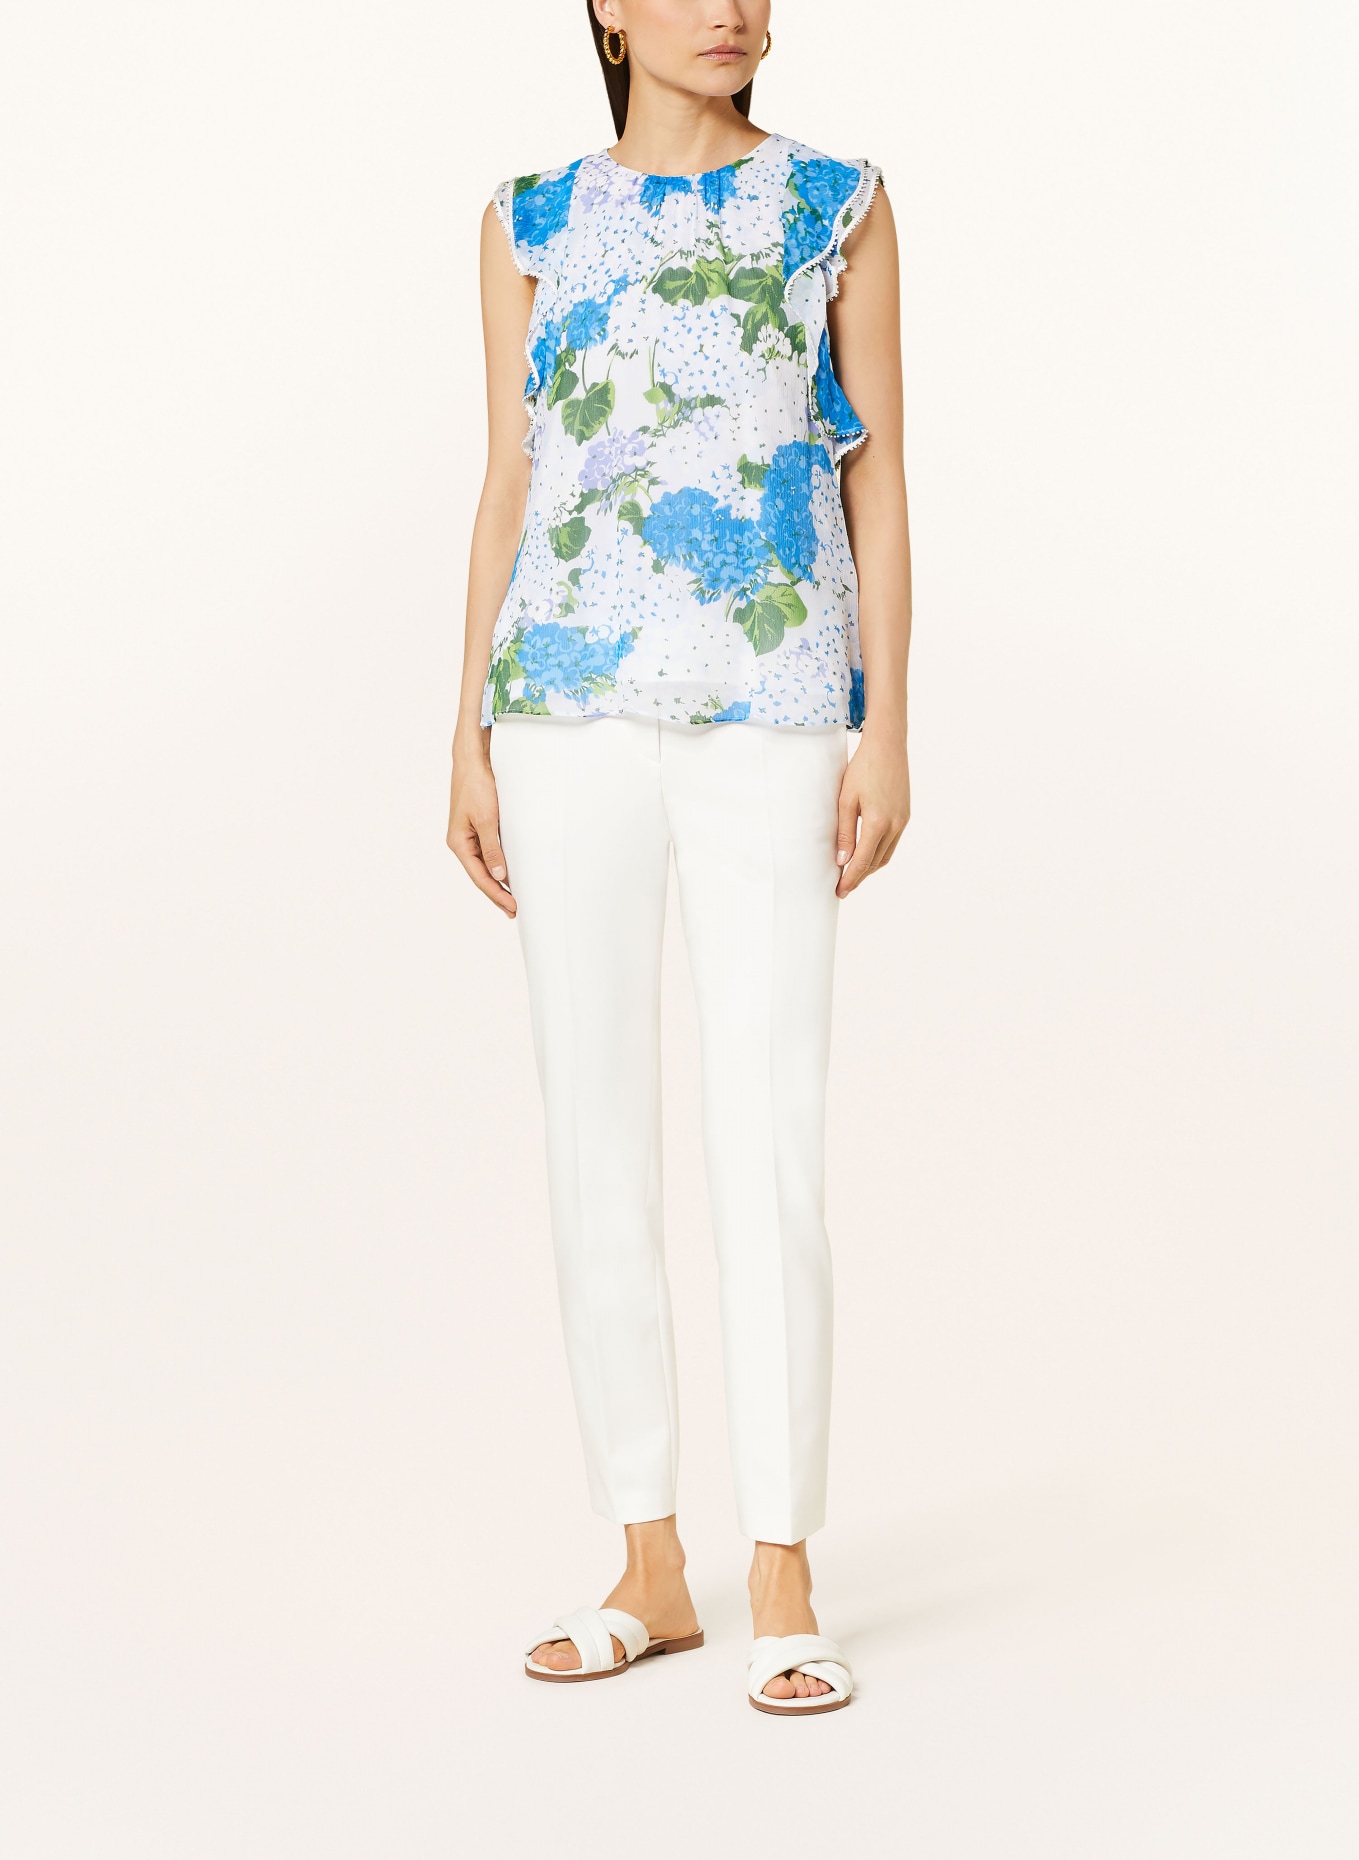 HOBBS Blouse top SIMONA with frills, Color: WHITE/ BLUE/ GREEN (Image 2)